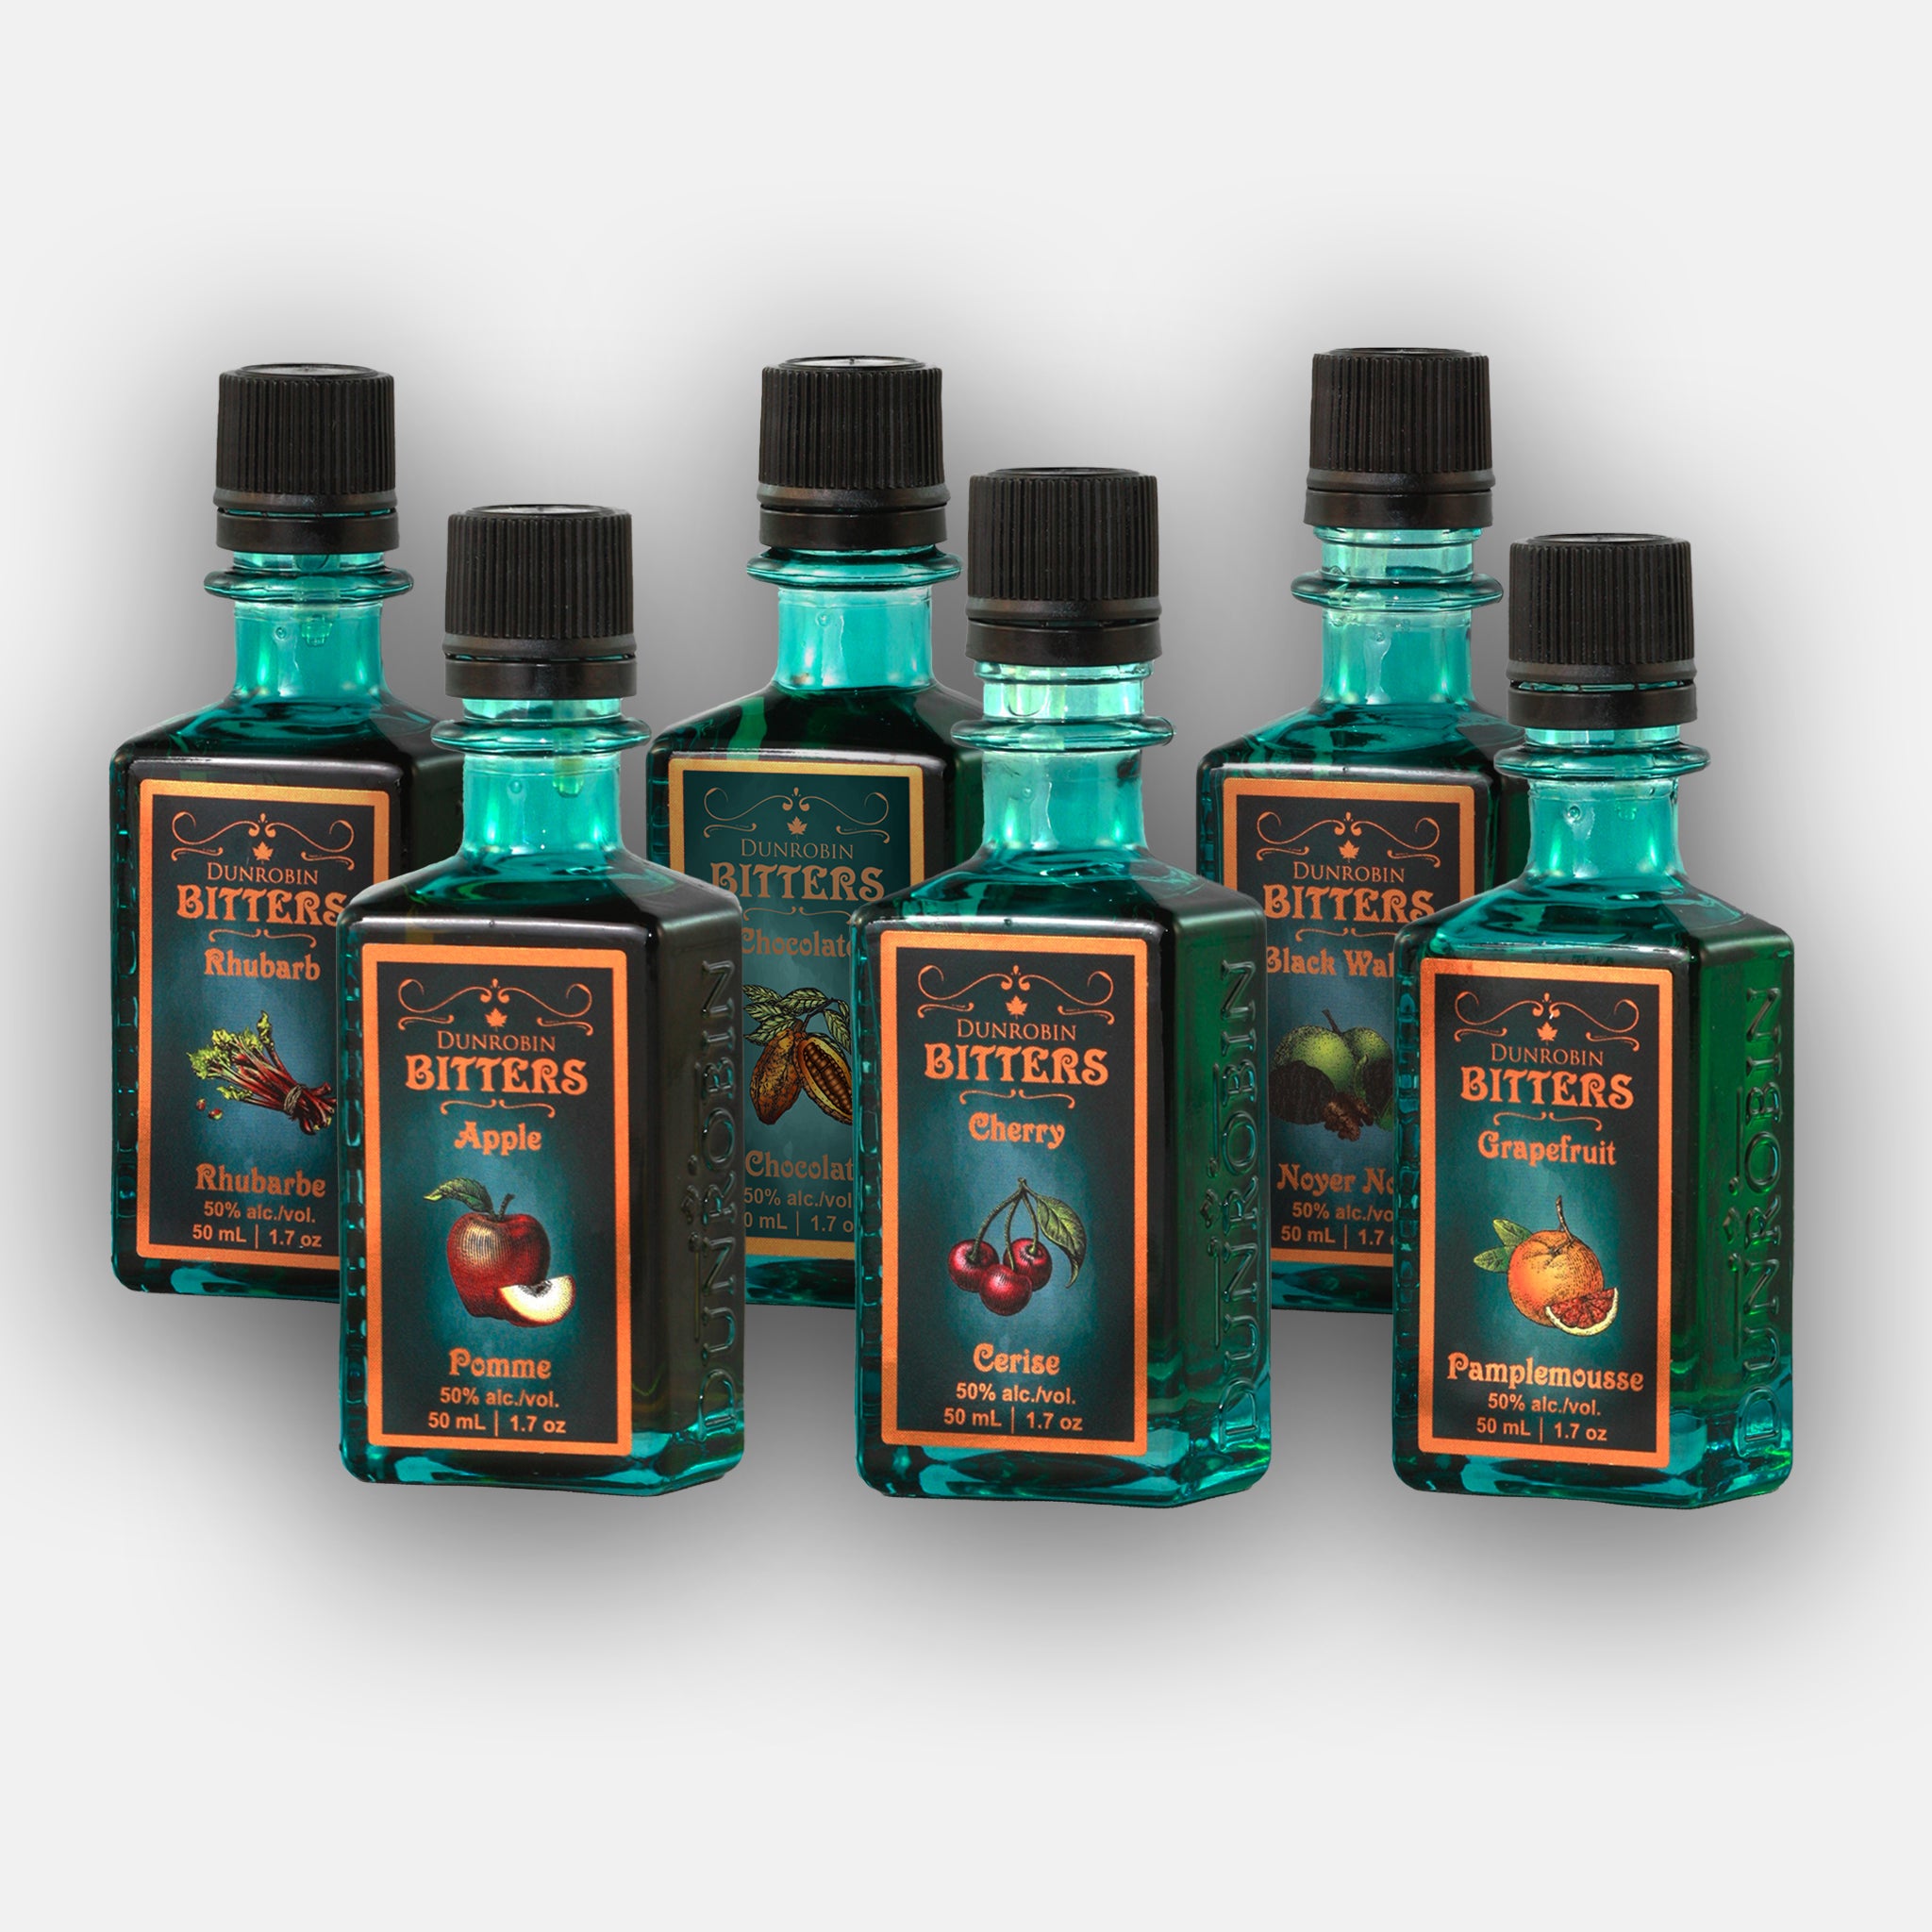 Bitters-Whisky Cocktails 6 Pack (50mL)